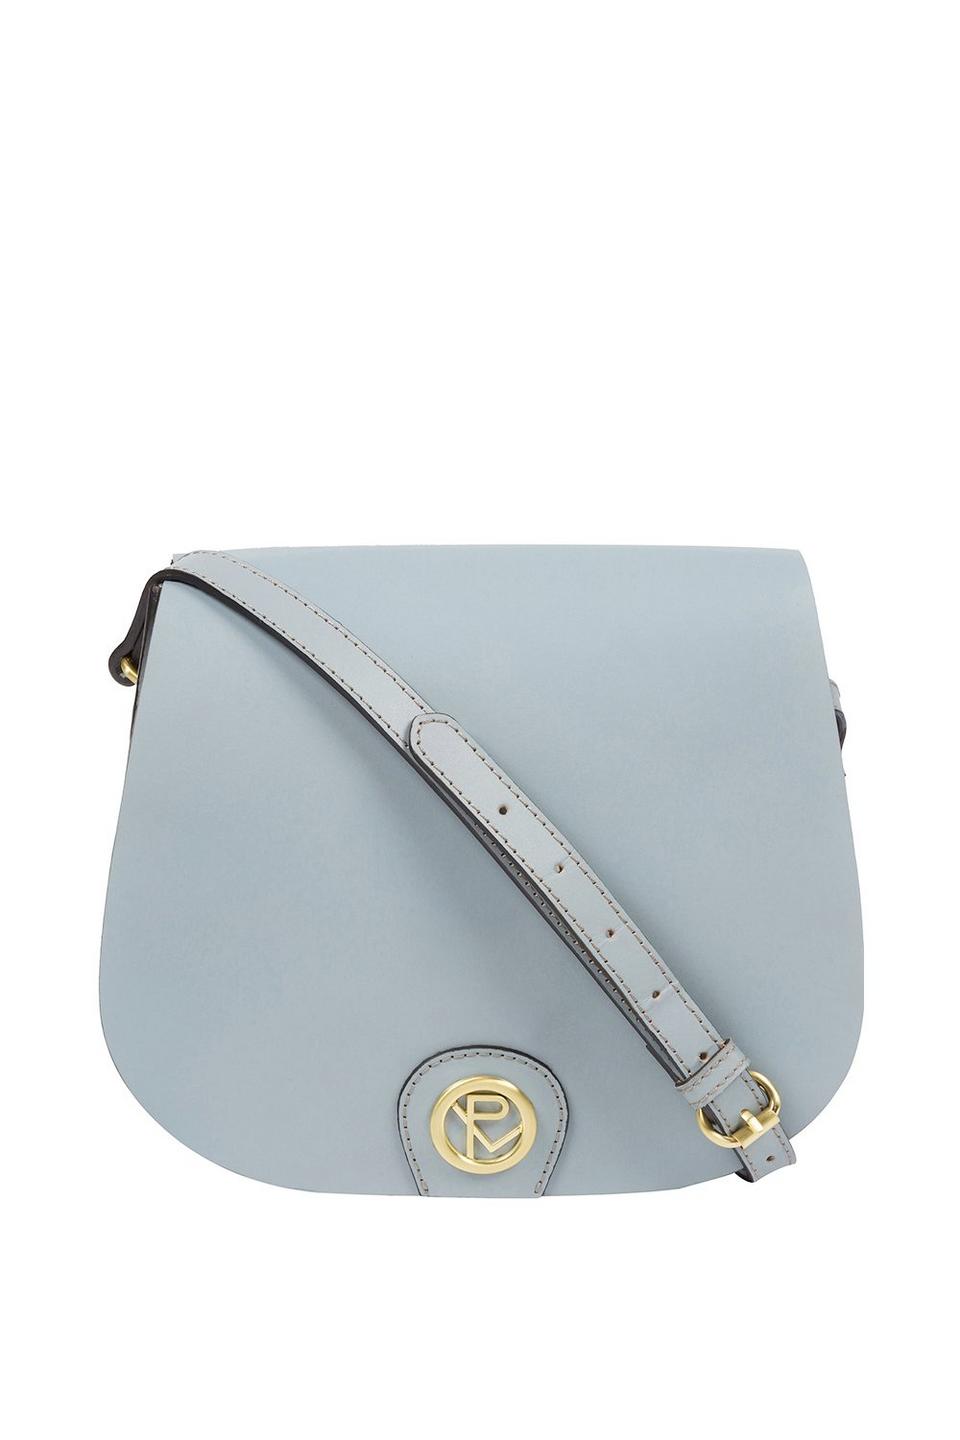 Bags & Purses | 'Ambleside' Leather Cross Body Bag | Pure Luxuries London